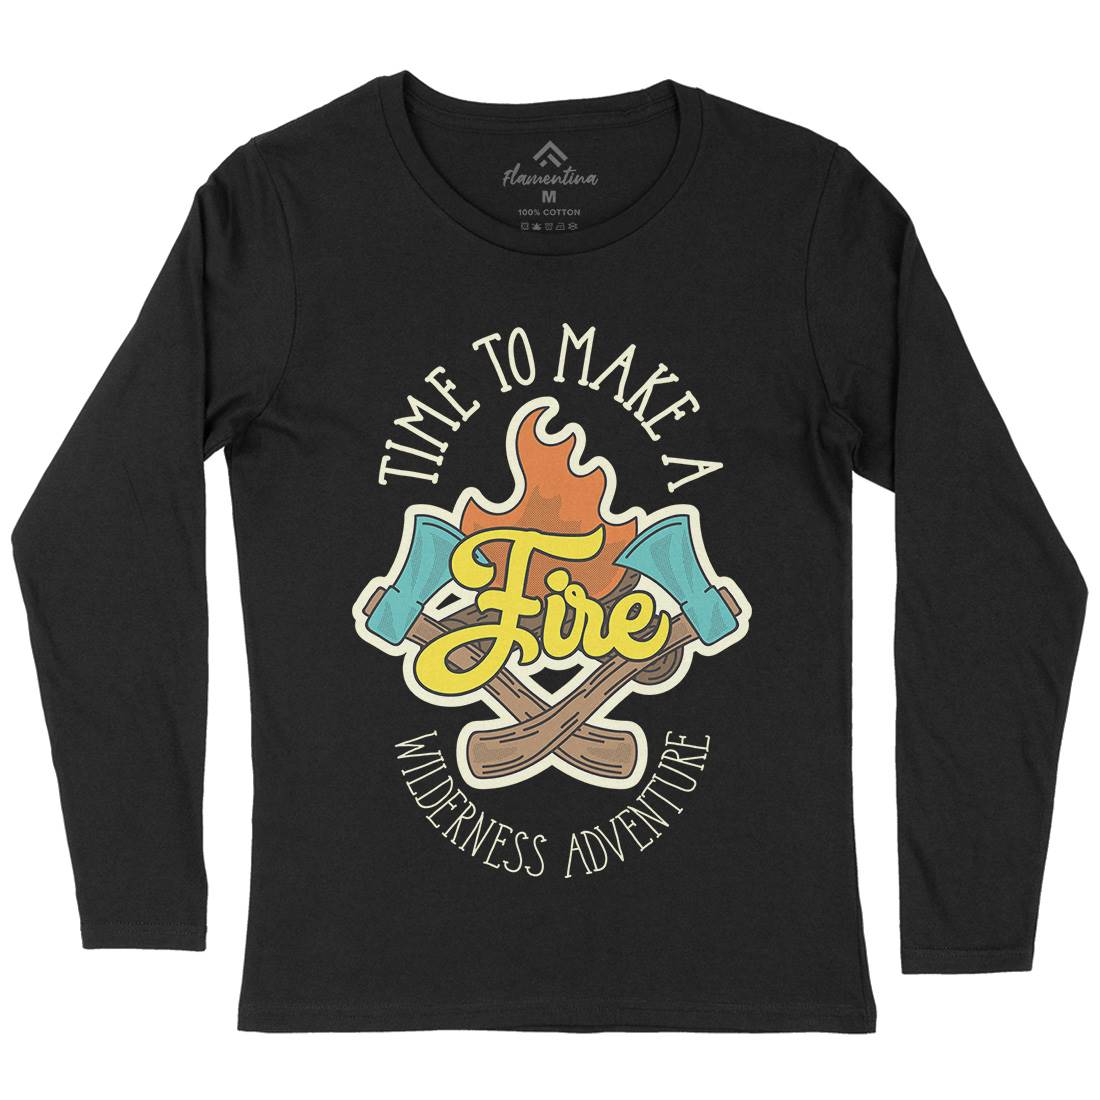 Time To Make Fire Womens Long Sleeve T-Shirt Nature D992